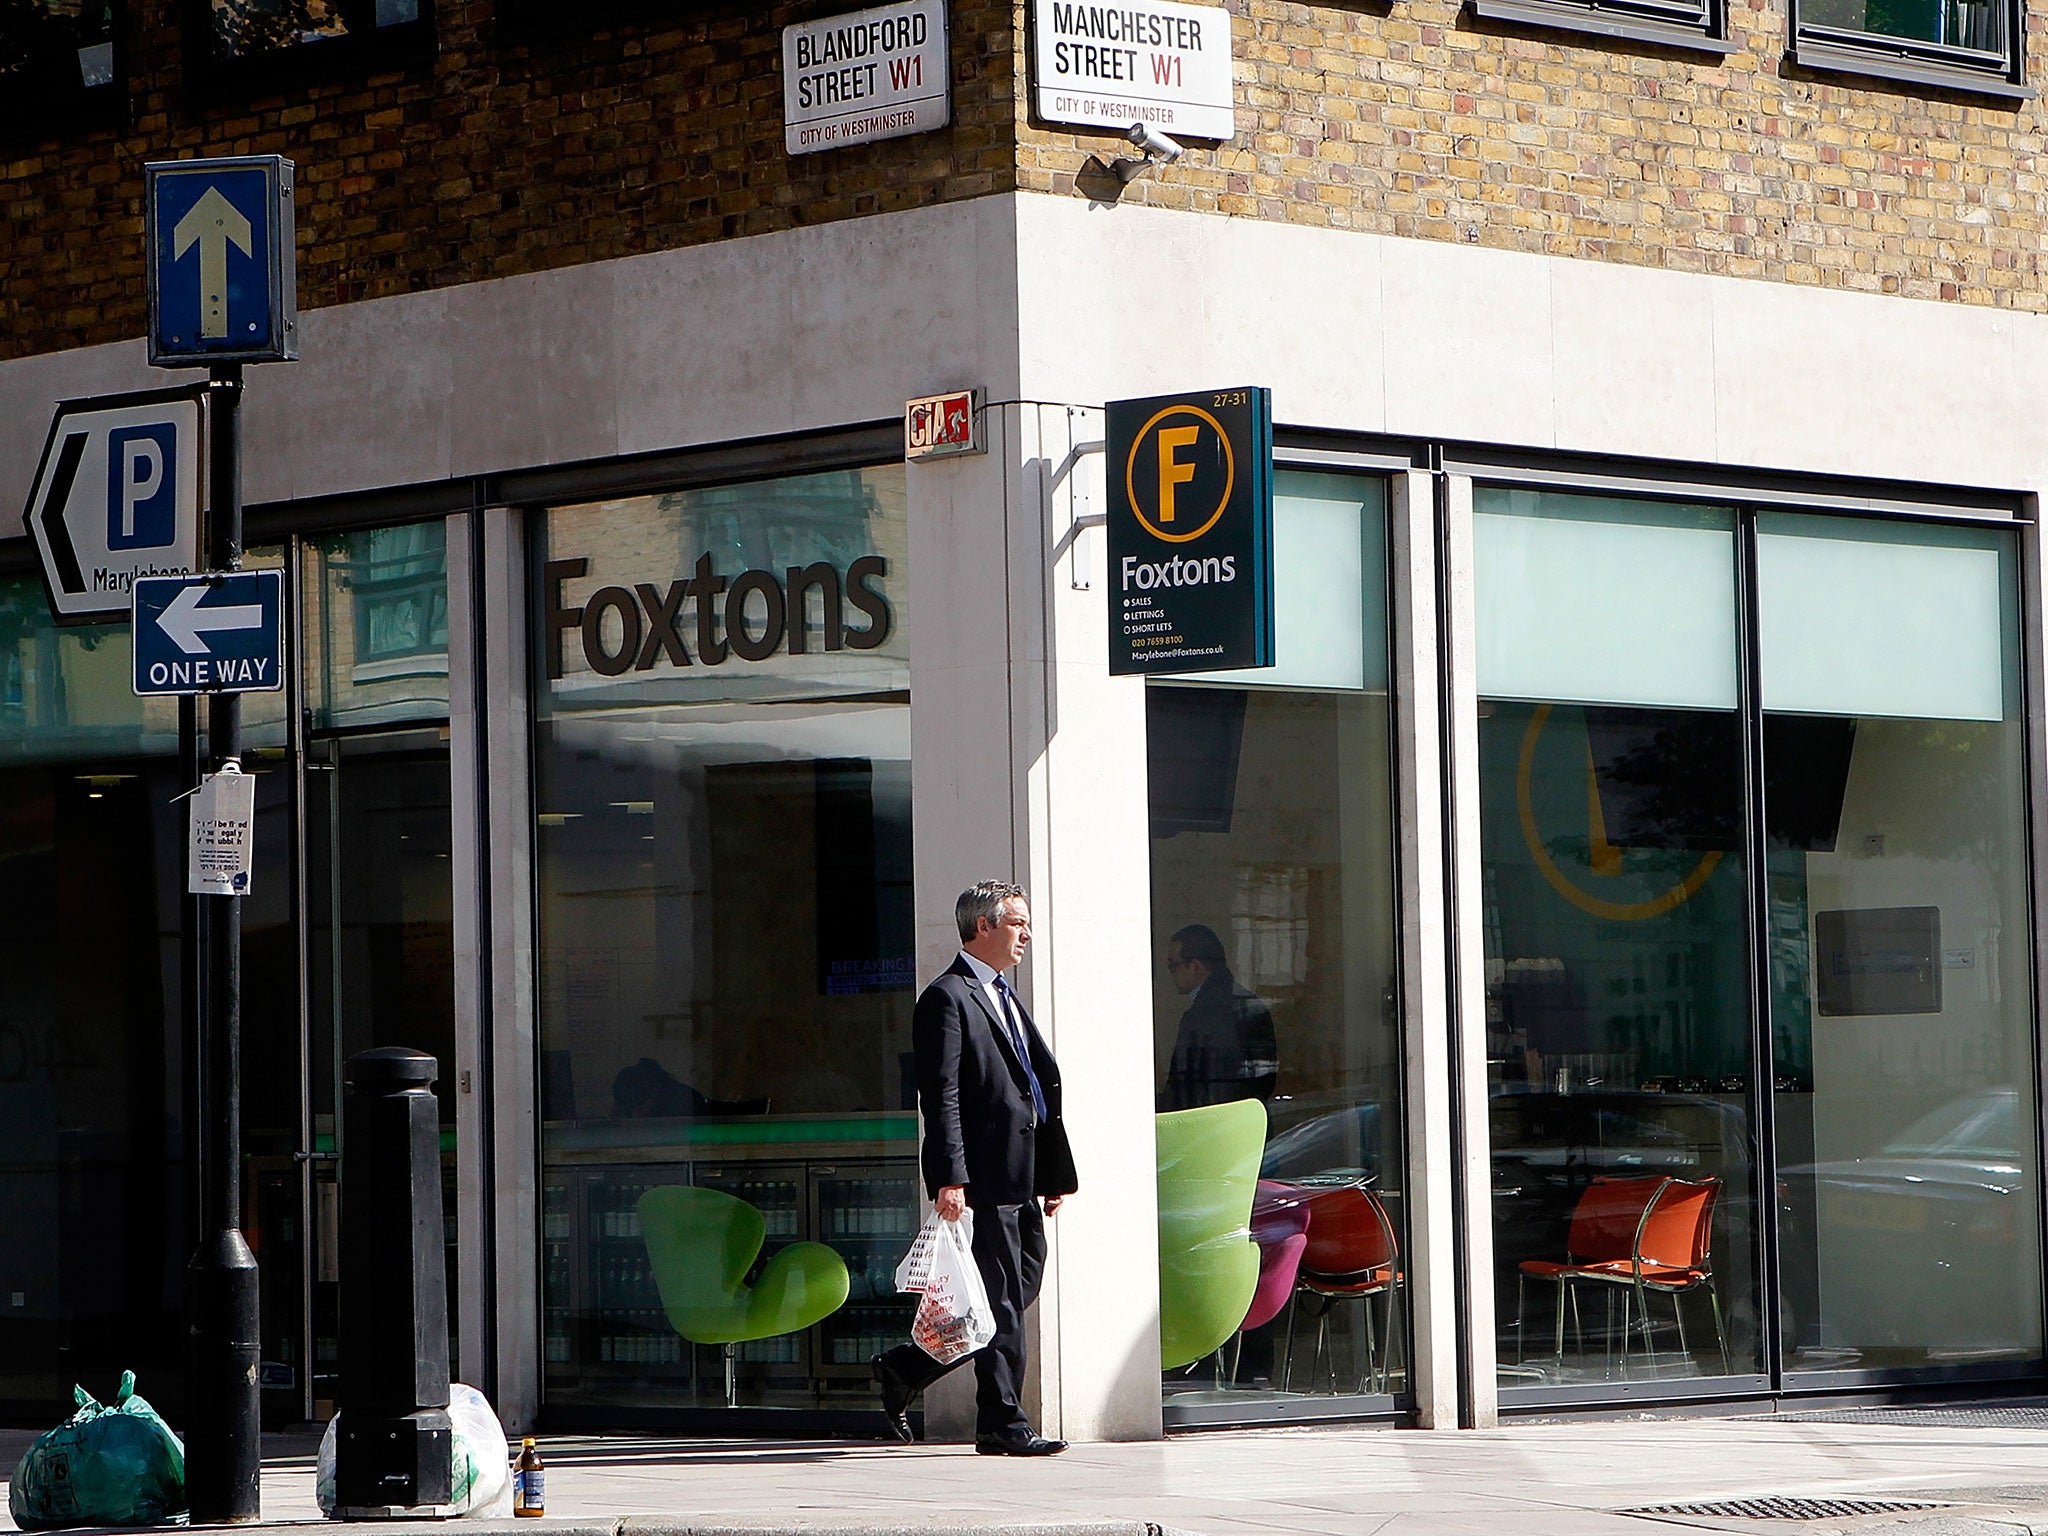 Foxtons have said that they are satisfied that their fees are clearly laid out in their terms and conditions